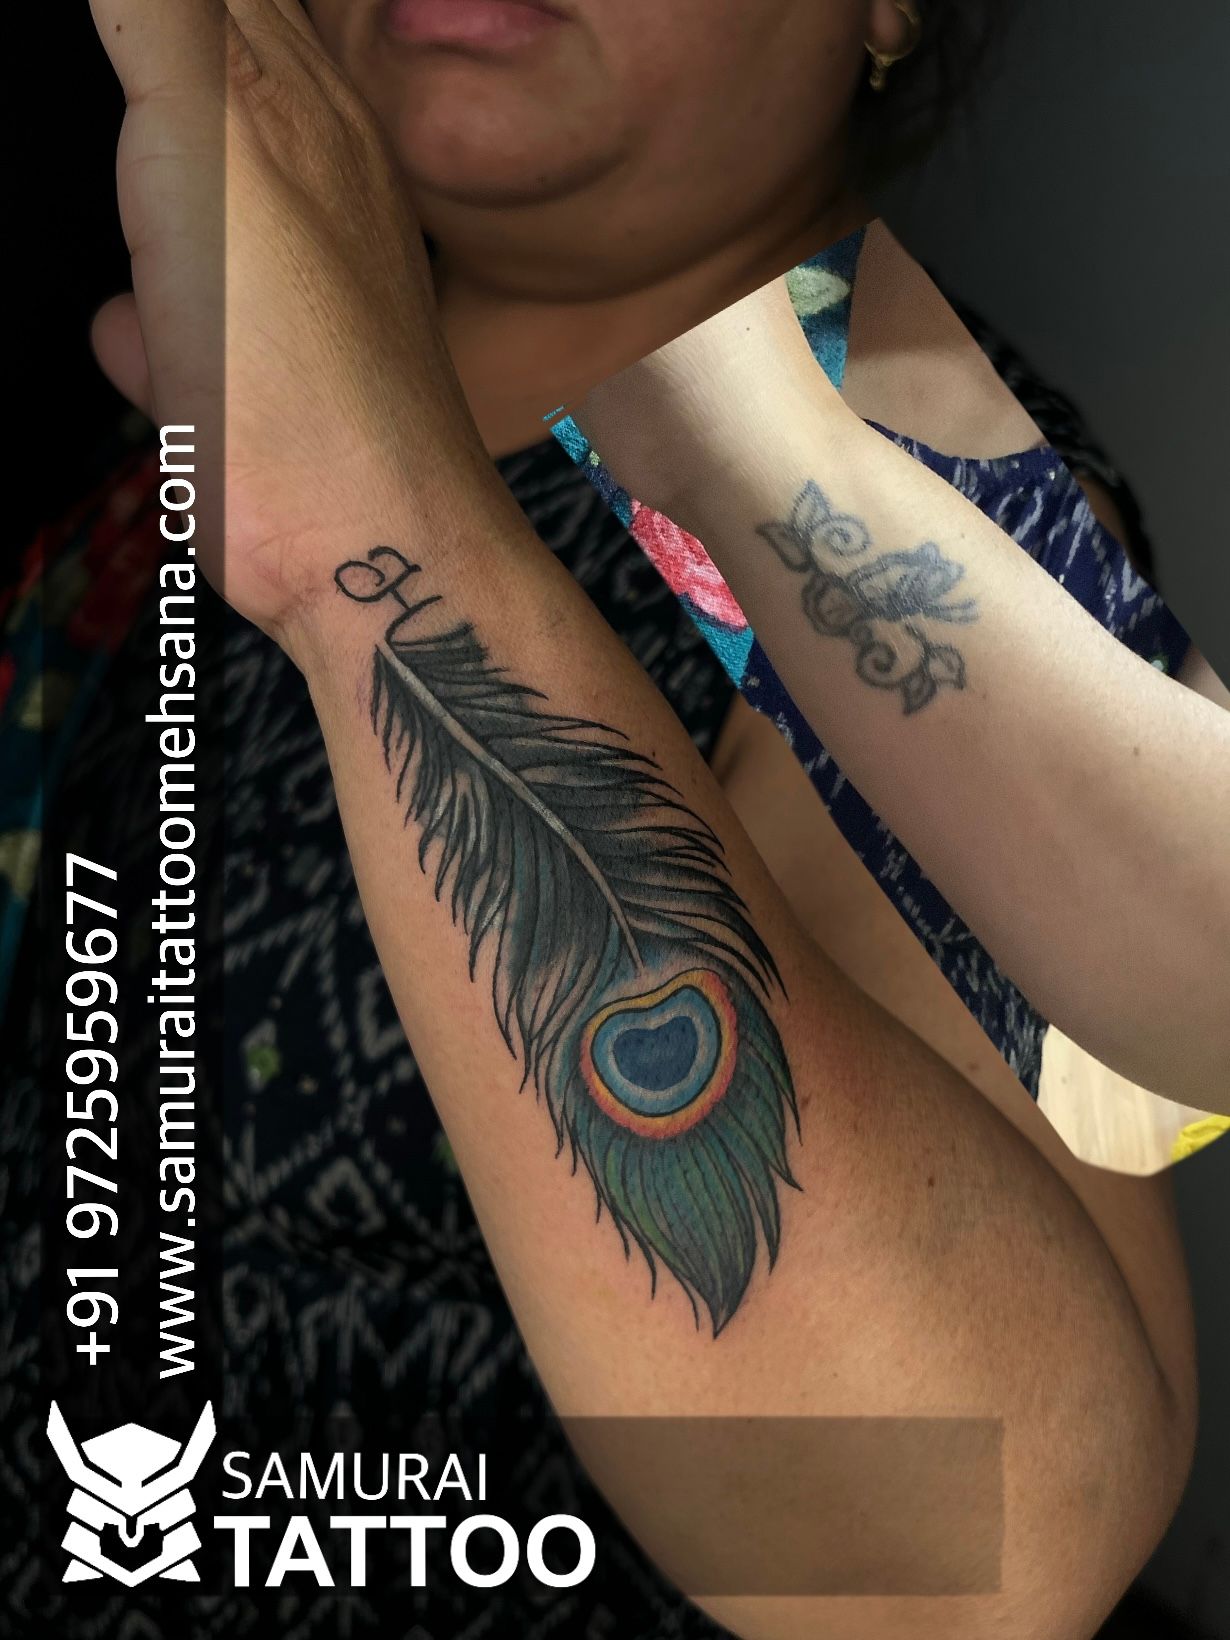 Tattoo uploaded by Vipul Chaudhary • Cover up tattoo, Coverup tattoo design, Coverup tattoo, Feather tattoo